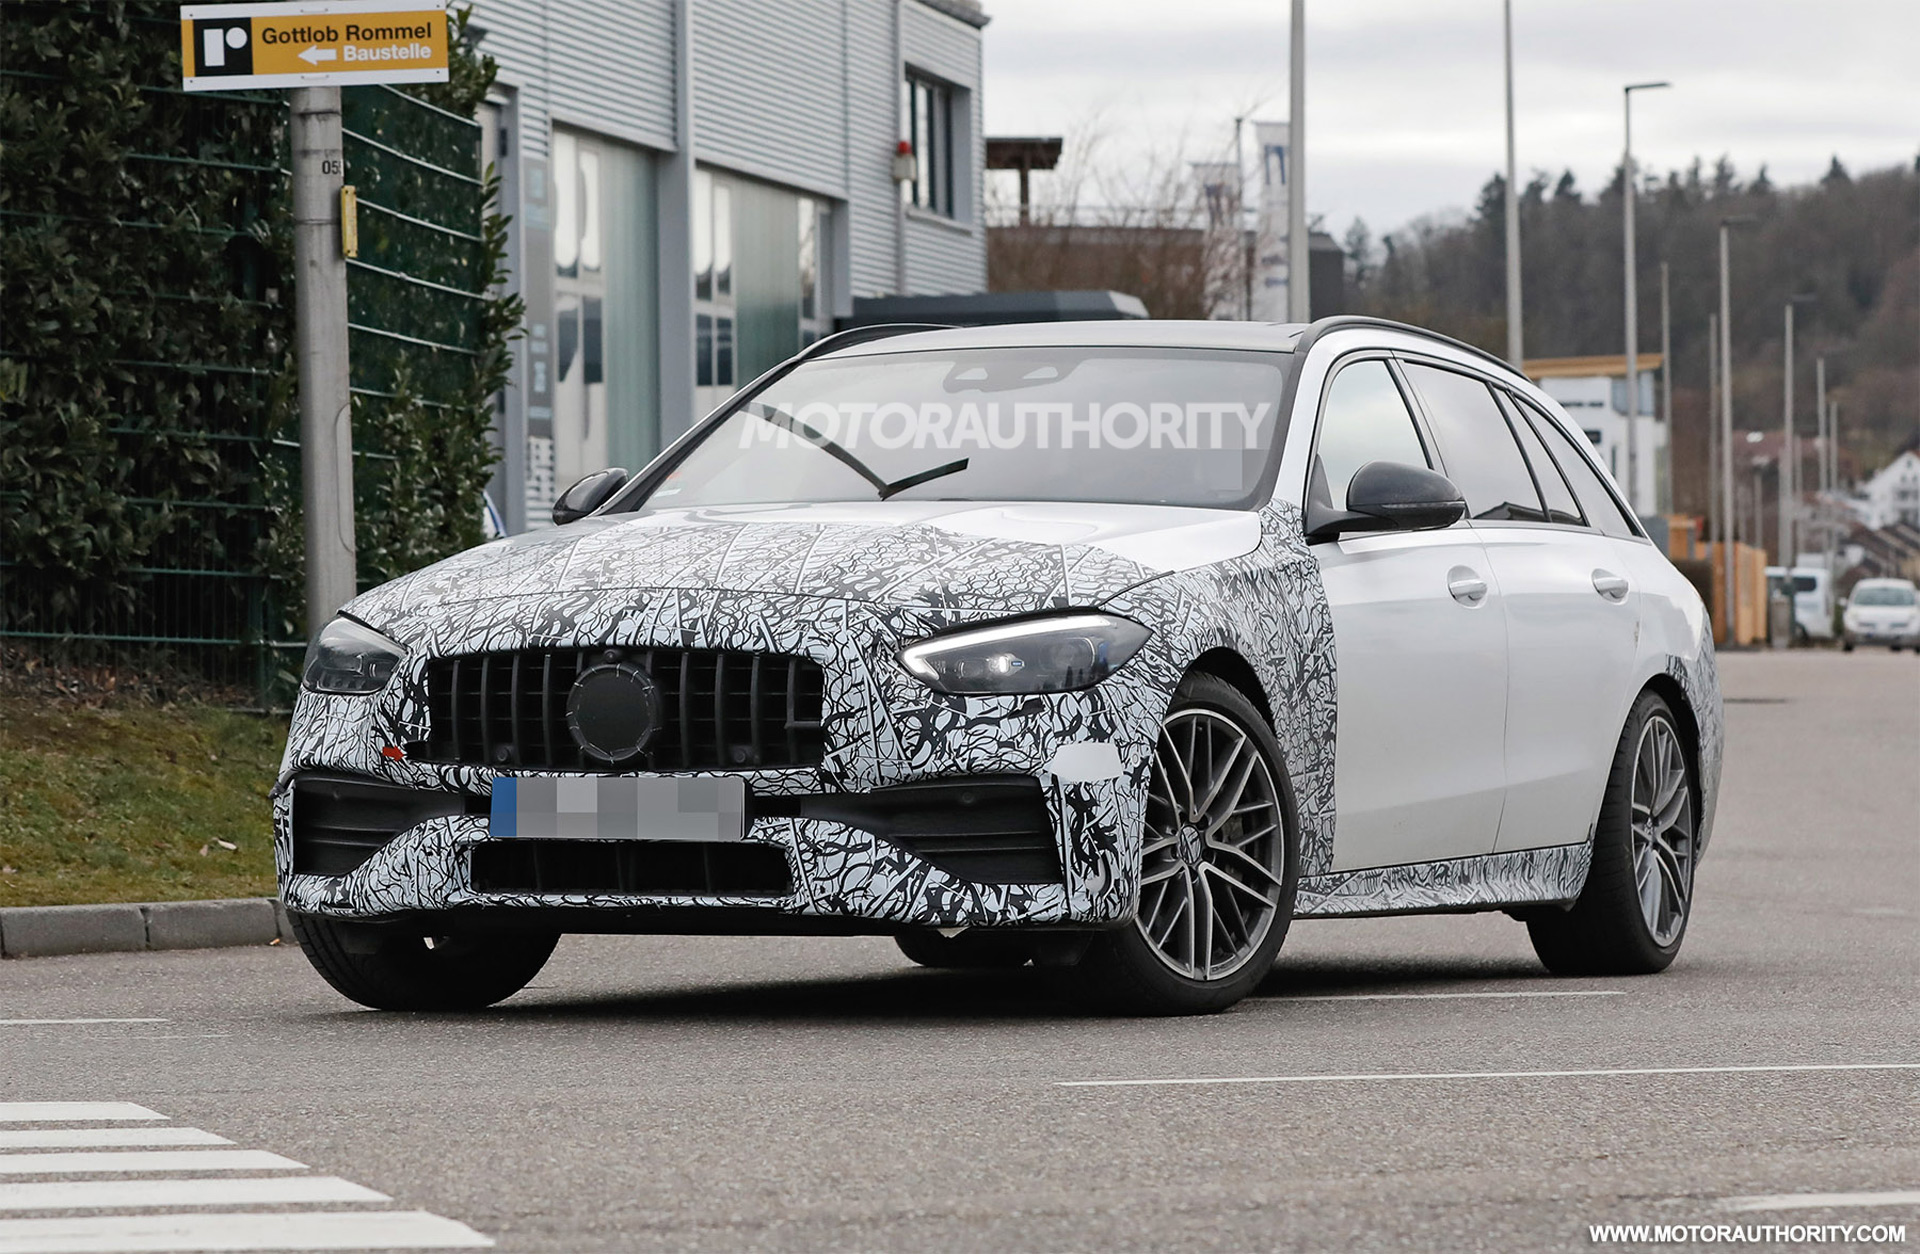 2023 MercedesBenz AMG C43 Wagon spy shots Sporty wagon coming but not to US